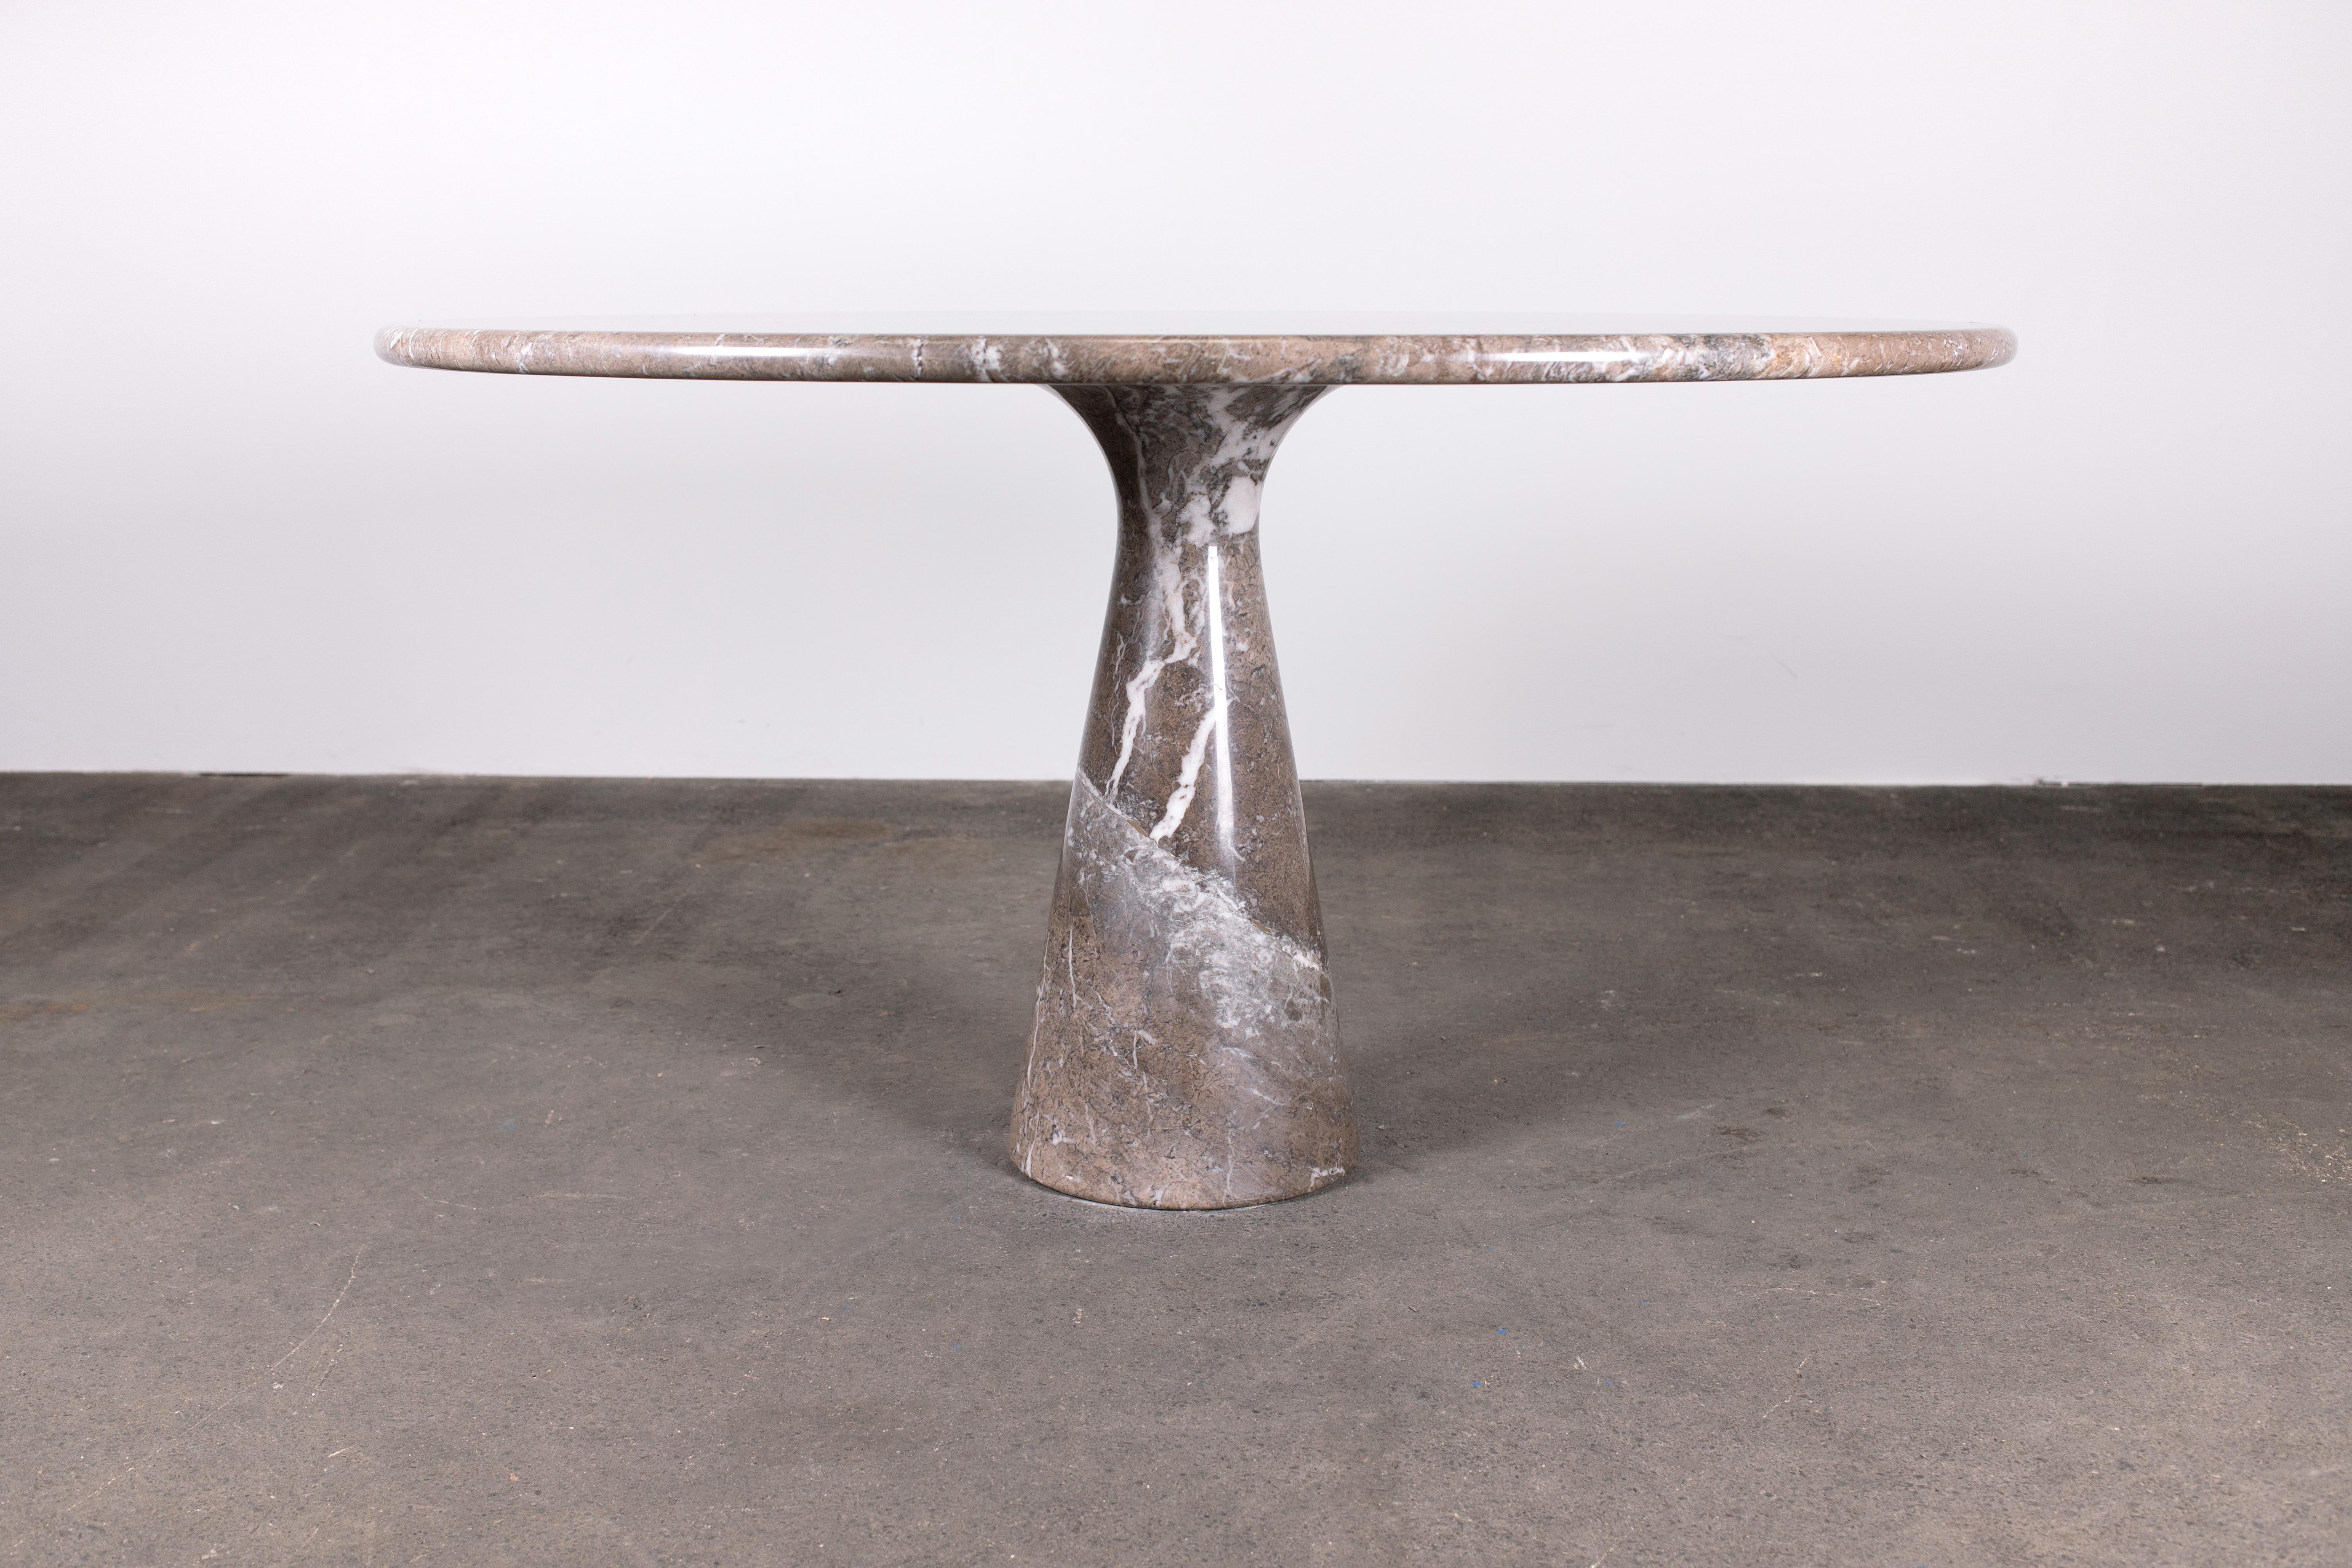 1970s Angelo Mangiarotti round pedestal dining table for Skipper in highly figured Mondragone marble and subtle metallic flecks. This table is from the M1 and measures 47in (130cm) in diameter.

The detachable round table top has clearly been carved